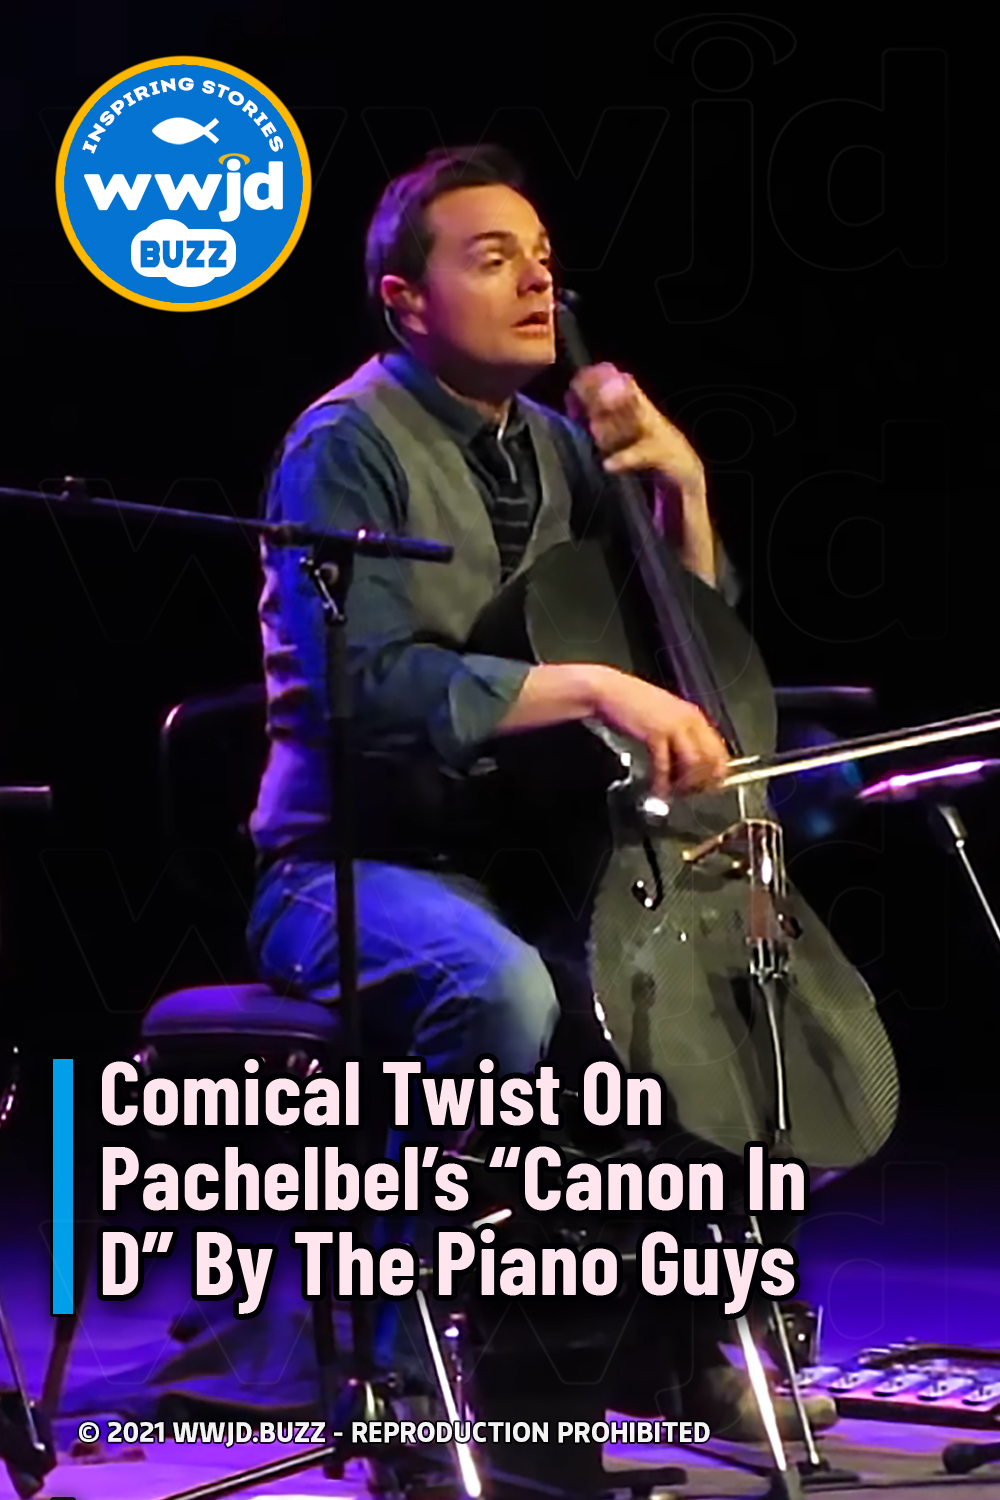 Comical Twist On Pachelbel’s “Canon In D” By The Piano Guys